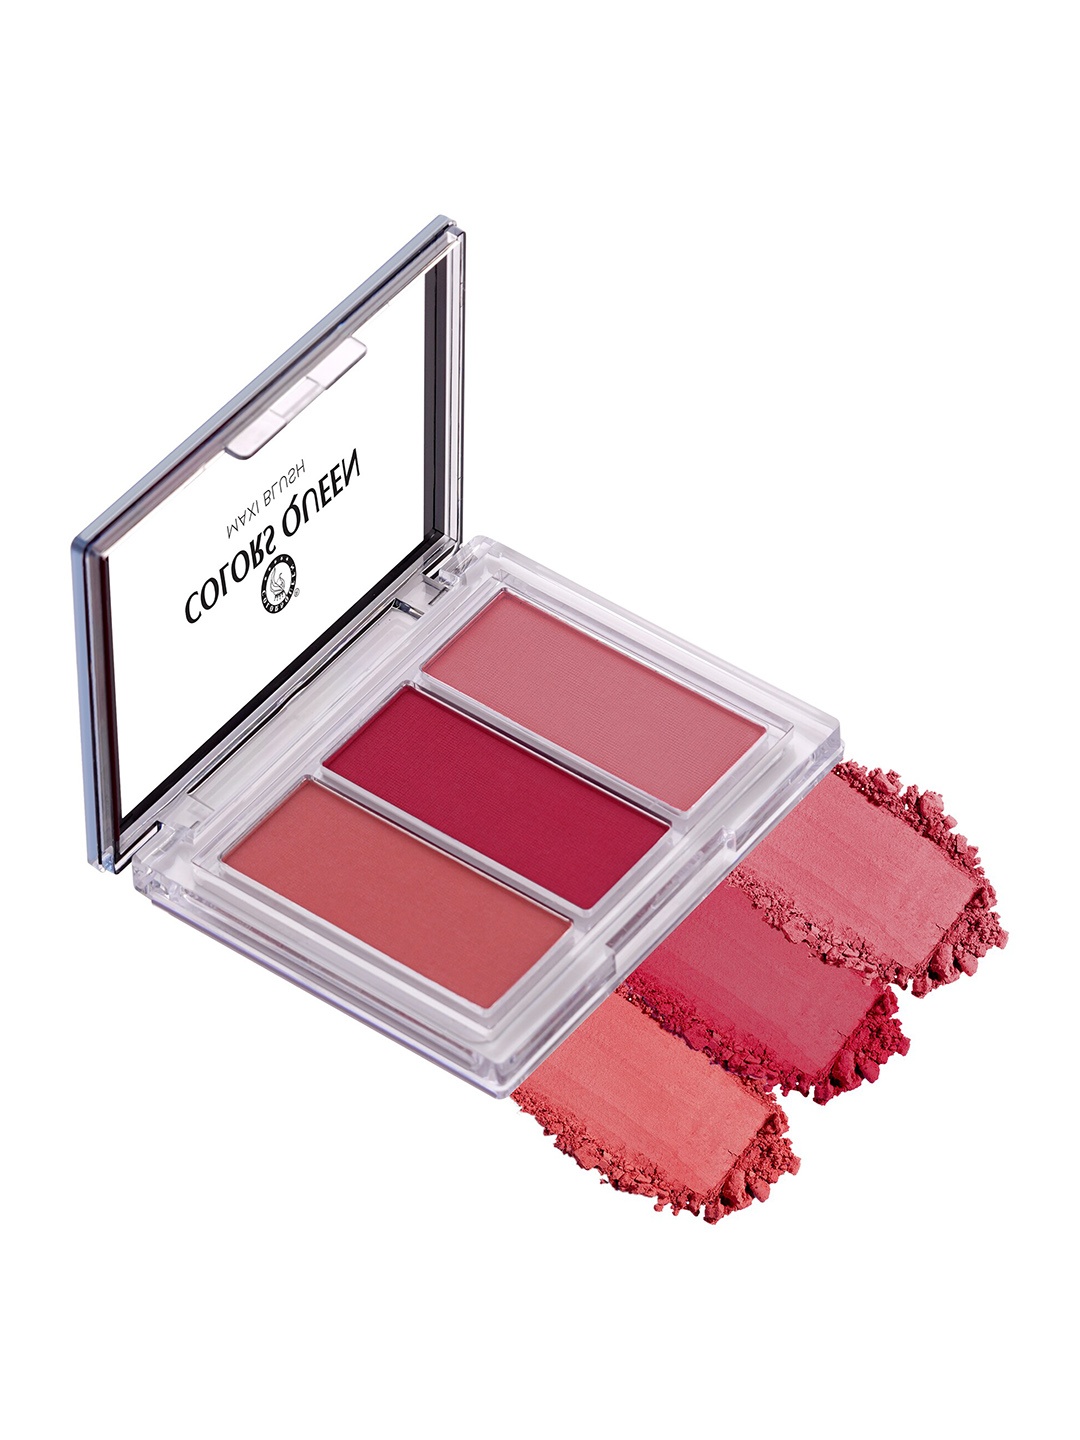 

Colors Queen Multicolor Maxi Blush 3 Shades Matte Blusher Palette-15gm-Shade - 02, Red